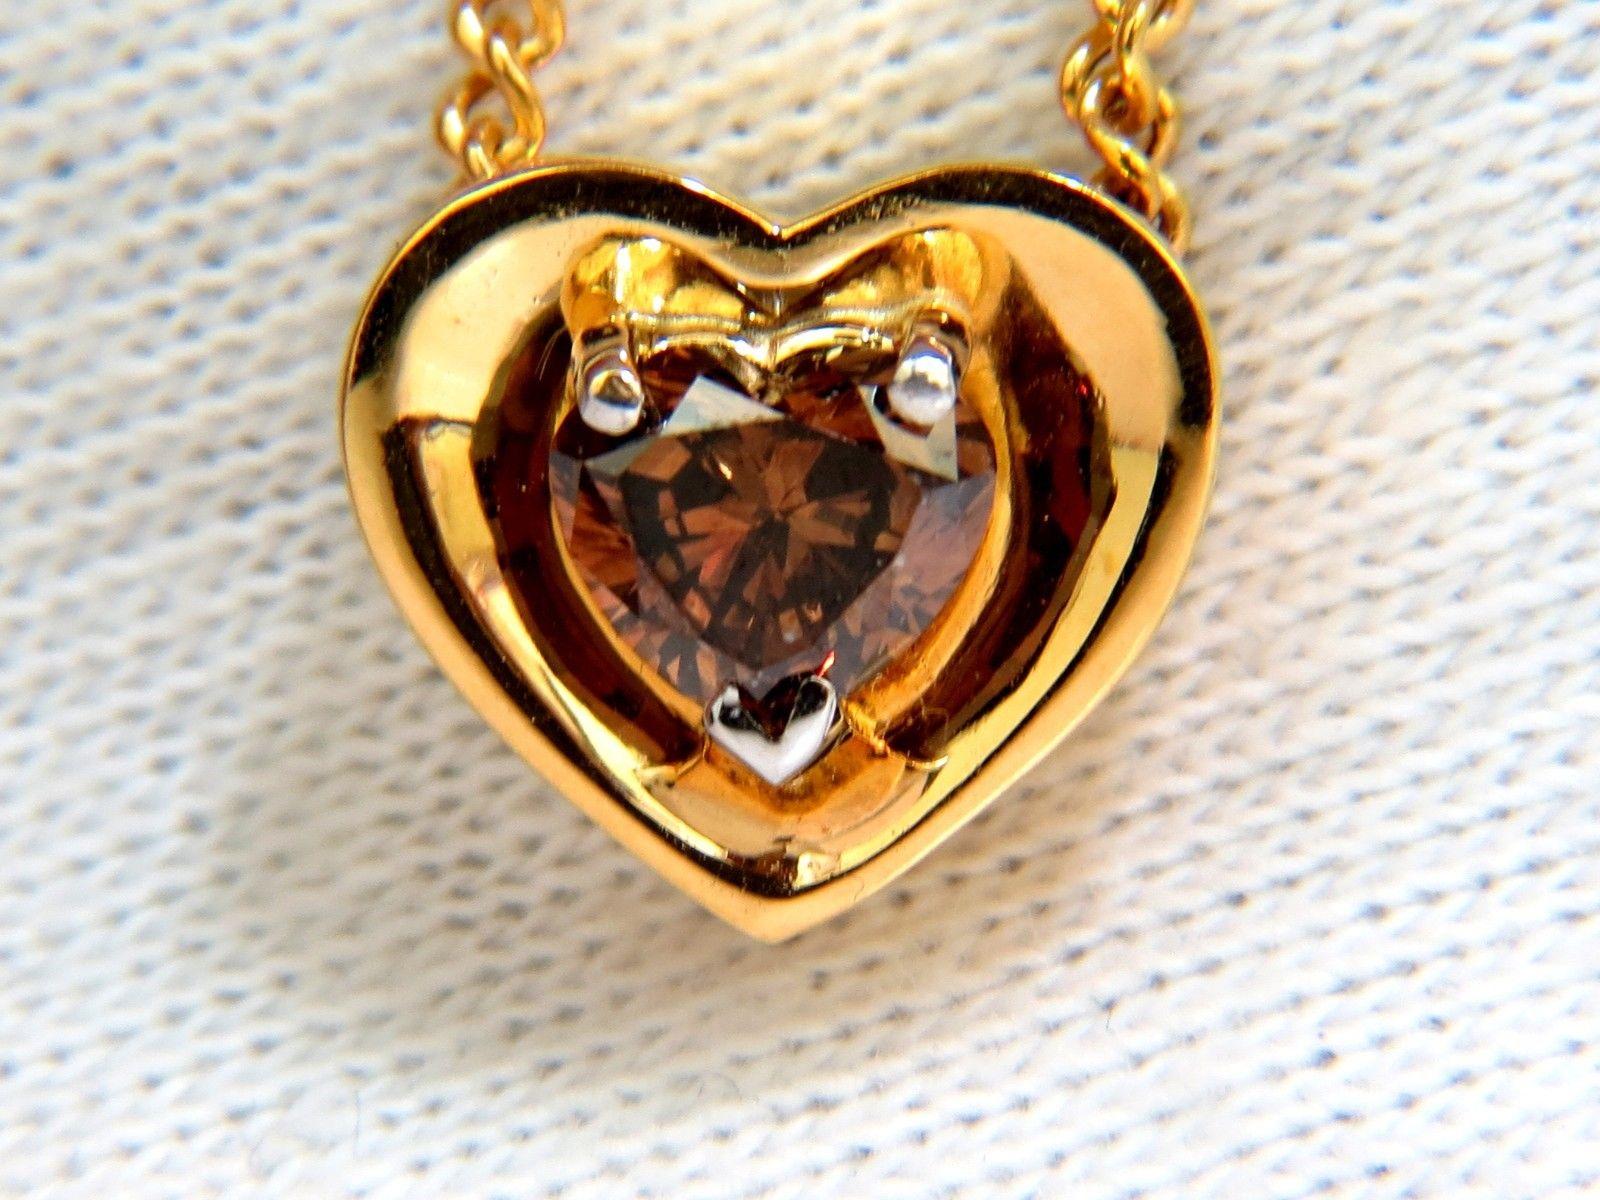 .78CT Natural Bright Pure Natural Fancy Brown Heart cut diamond pendant.

Vs-2 Clean Clarity, Fully transparent.

Full cut, amazing sparkles

14Kt Yellow Gold

& Necklace included

Grand Weight: 5.2 Grams

Appraisal to accompany @ $6,500